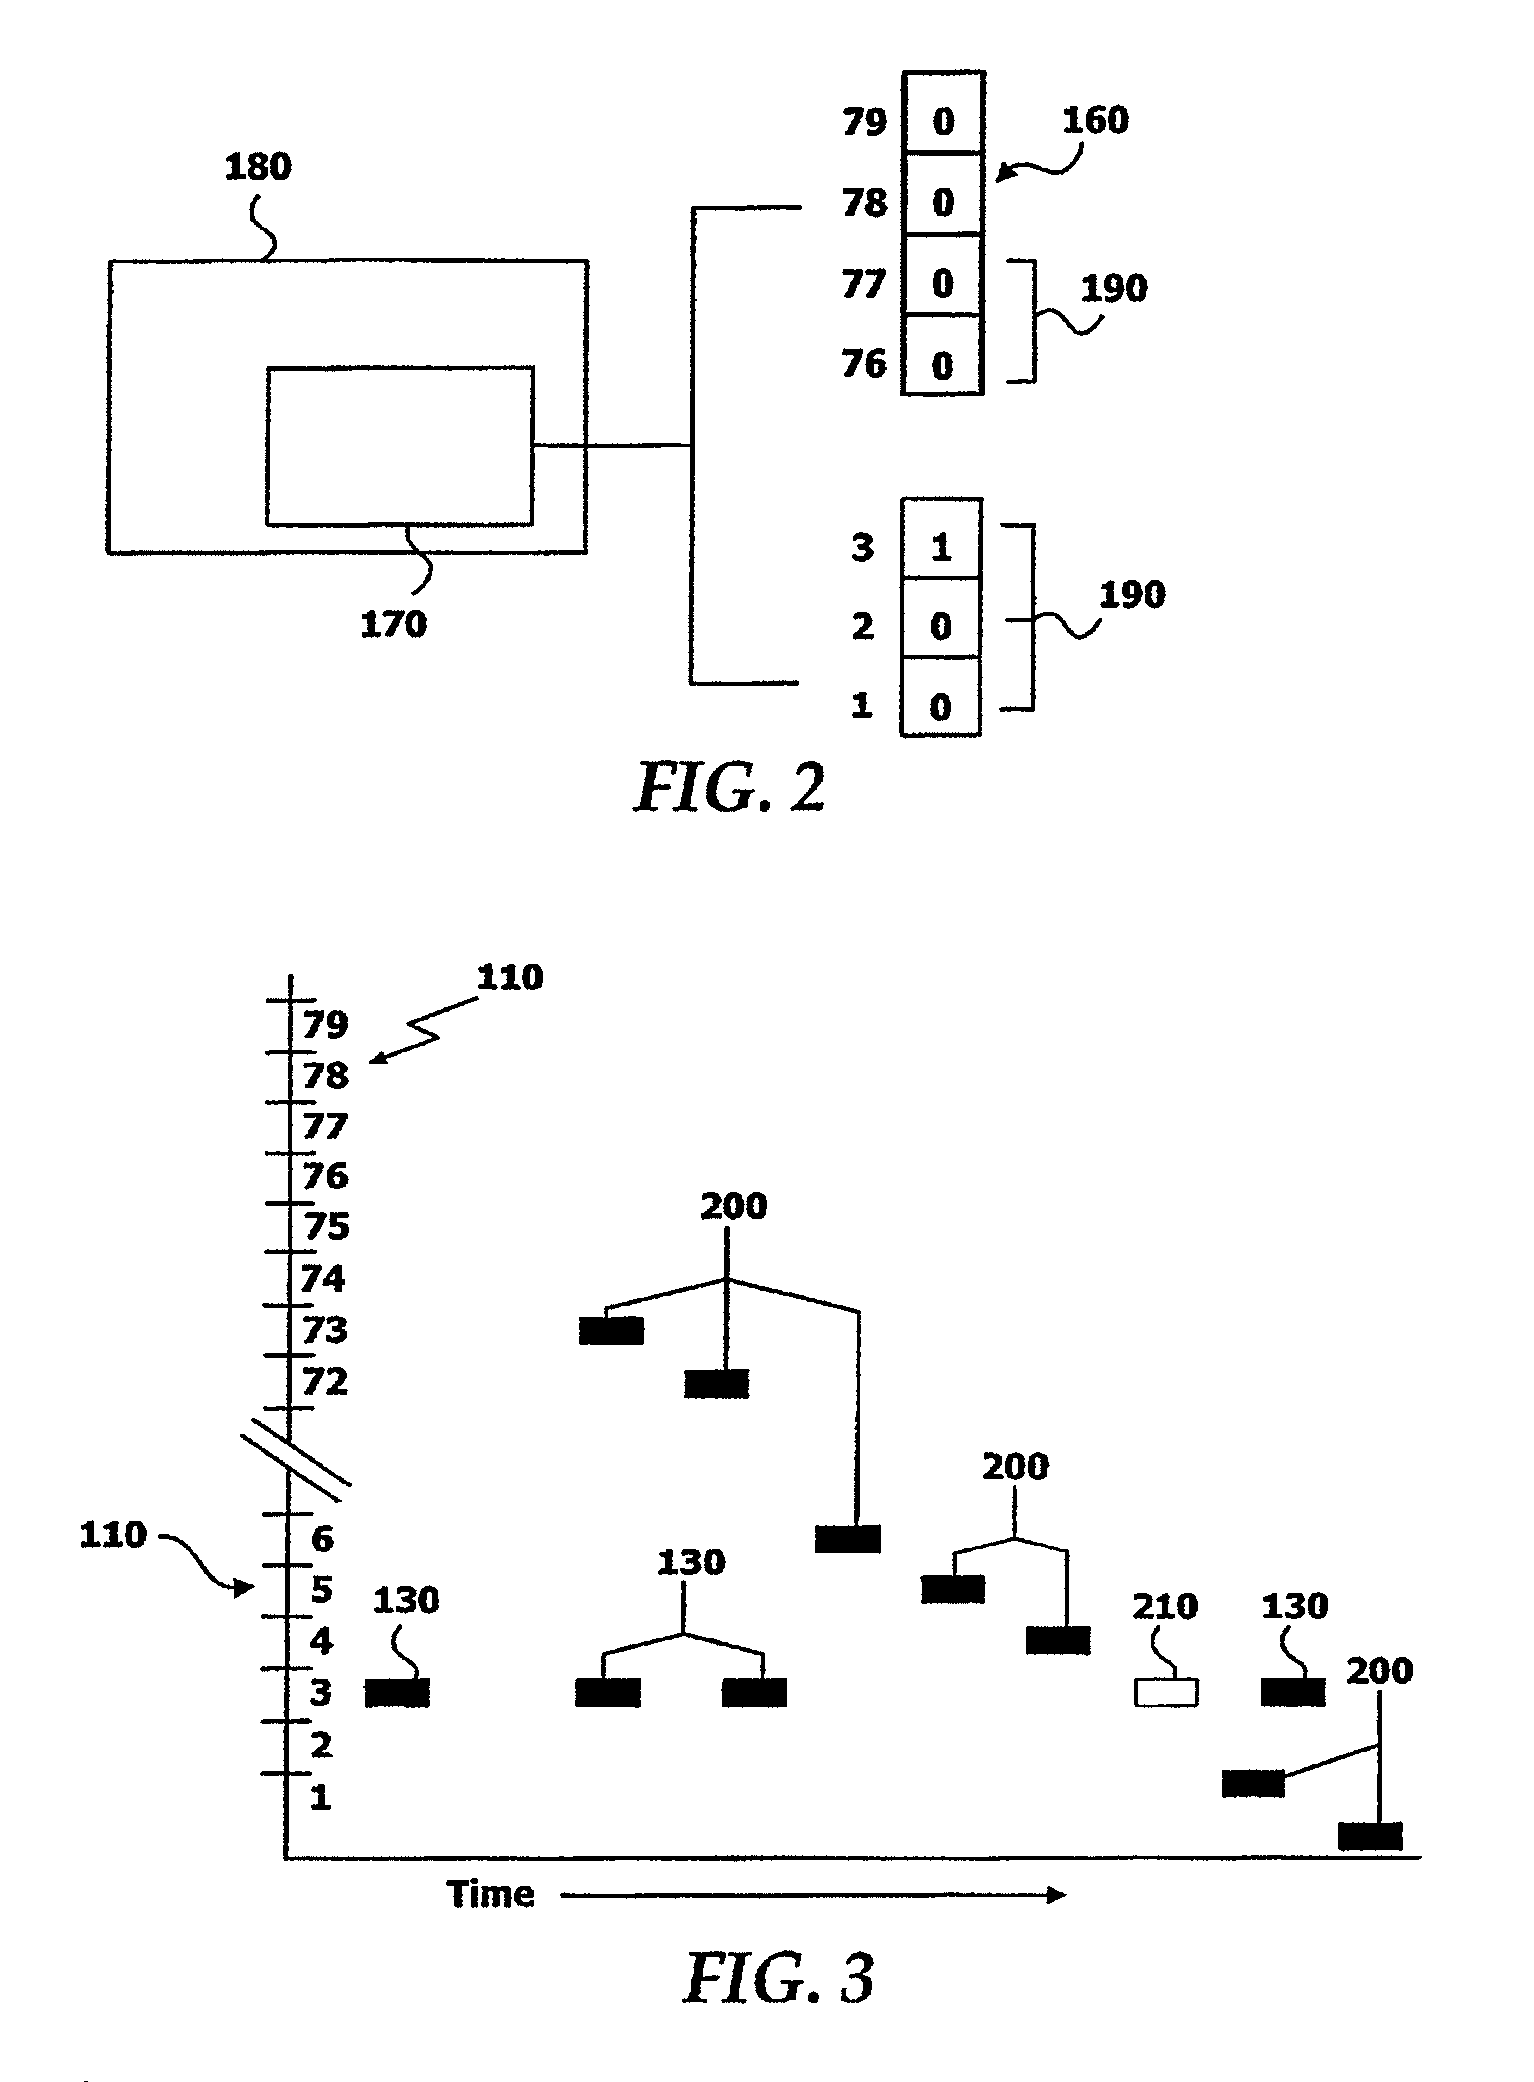 Insertion of null packets to mitigate the effects of interference in wireless communications